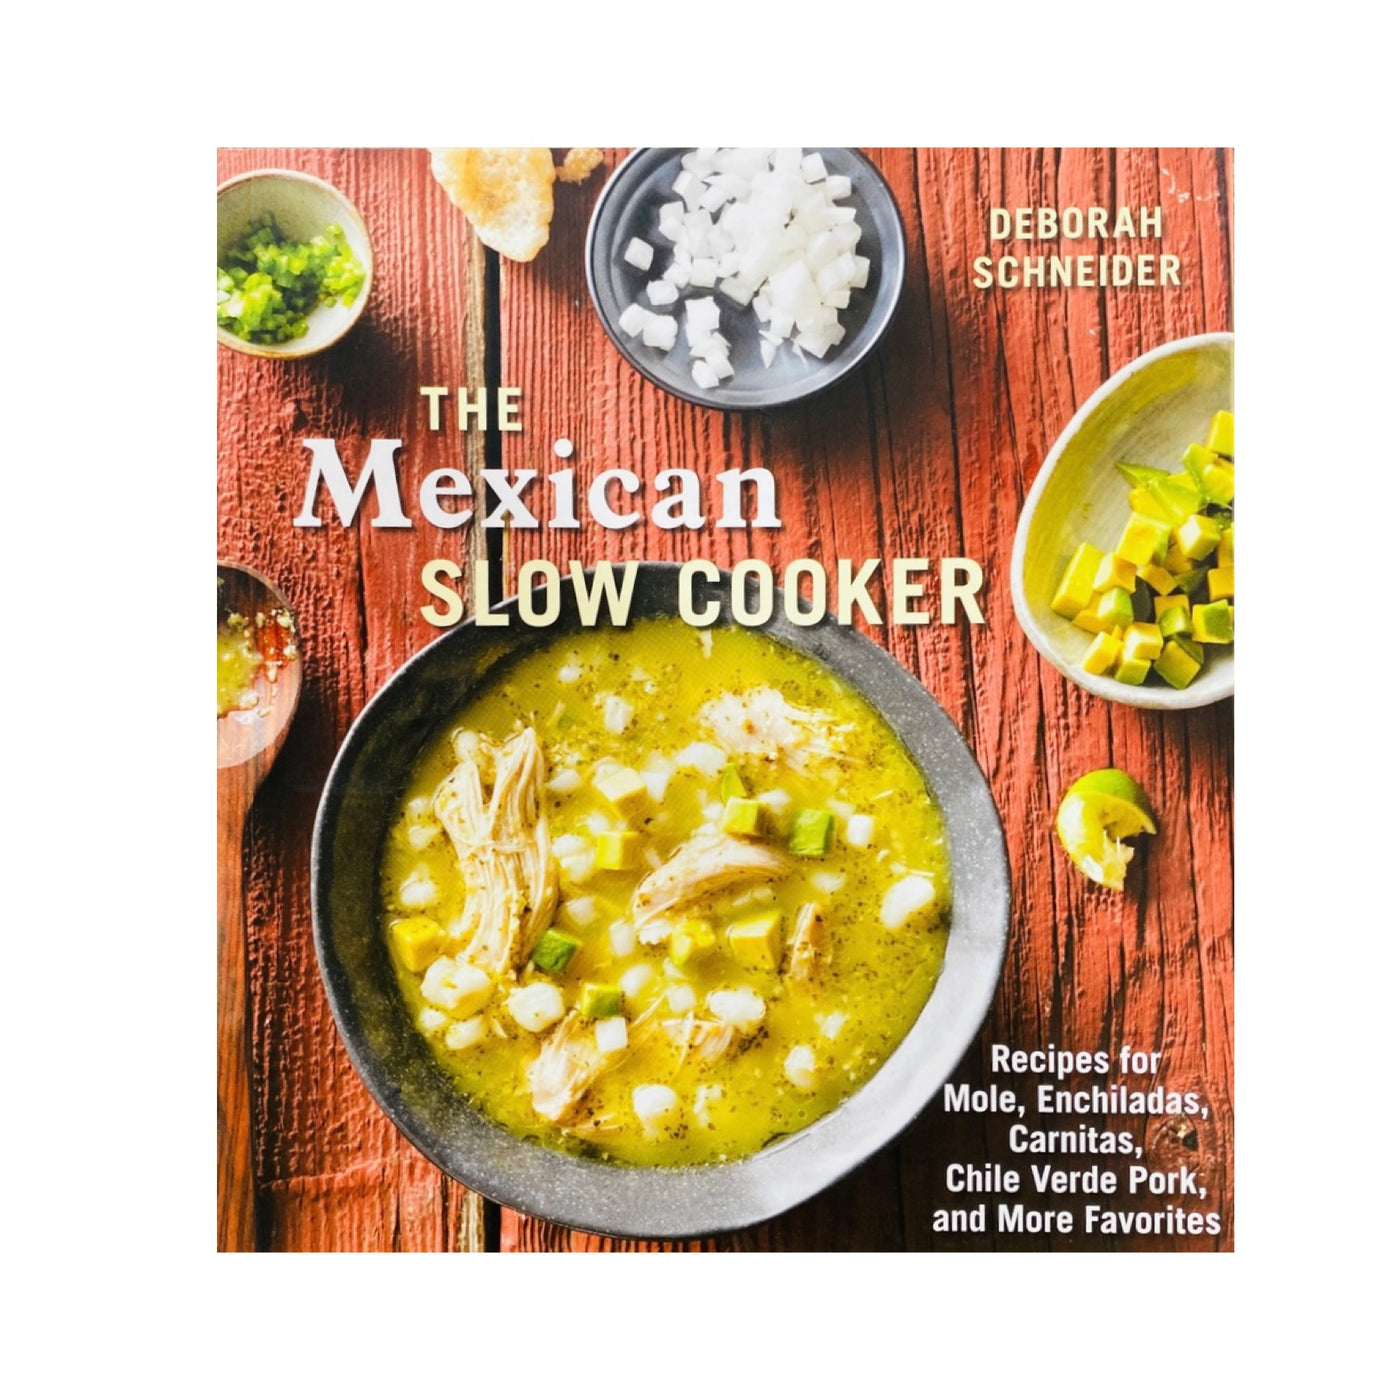 The Mexican Slow Cooker book front cover